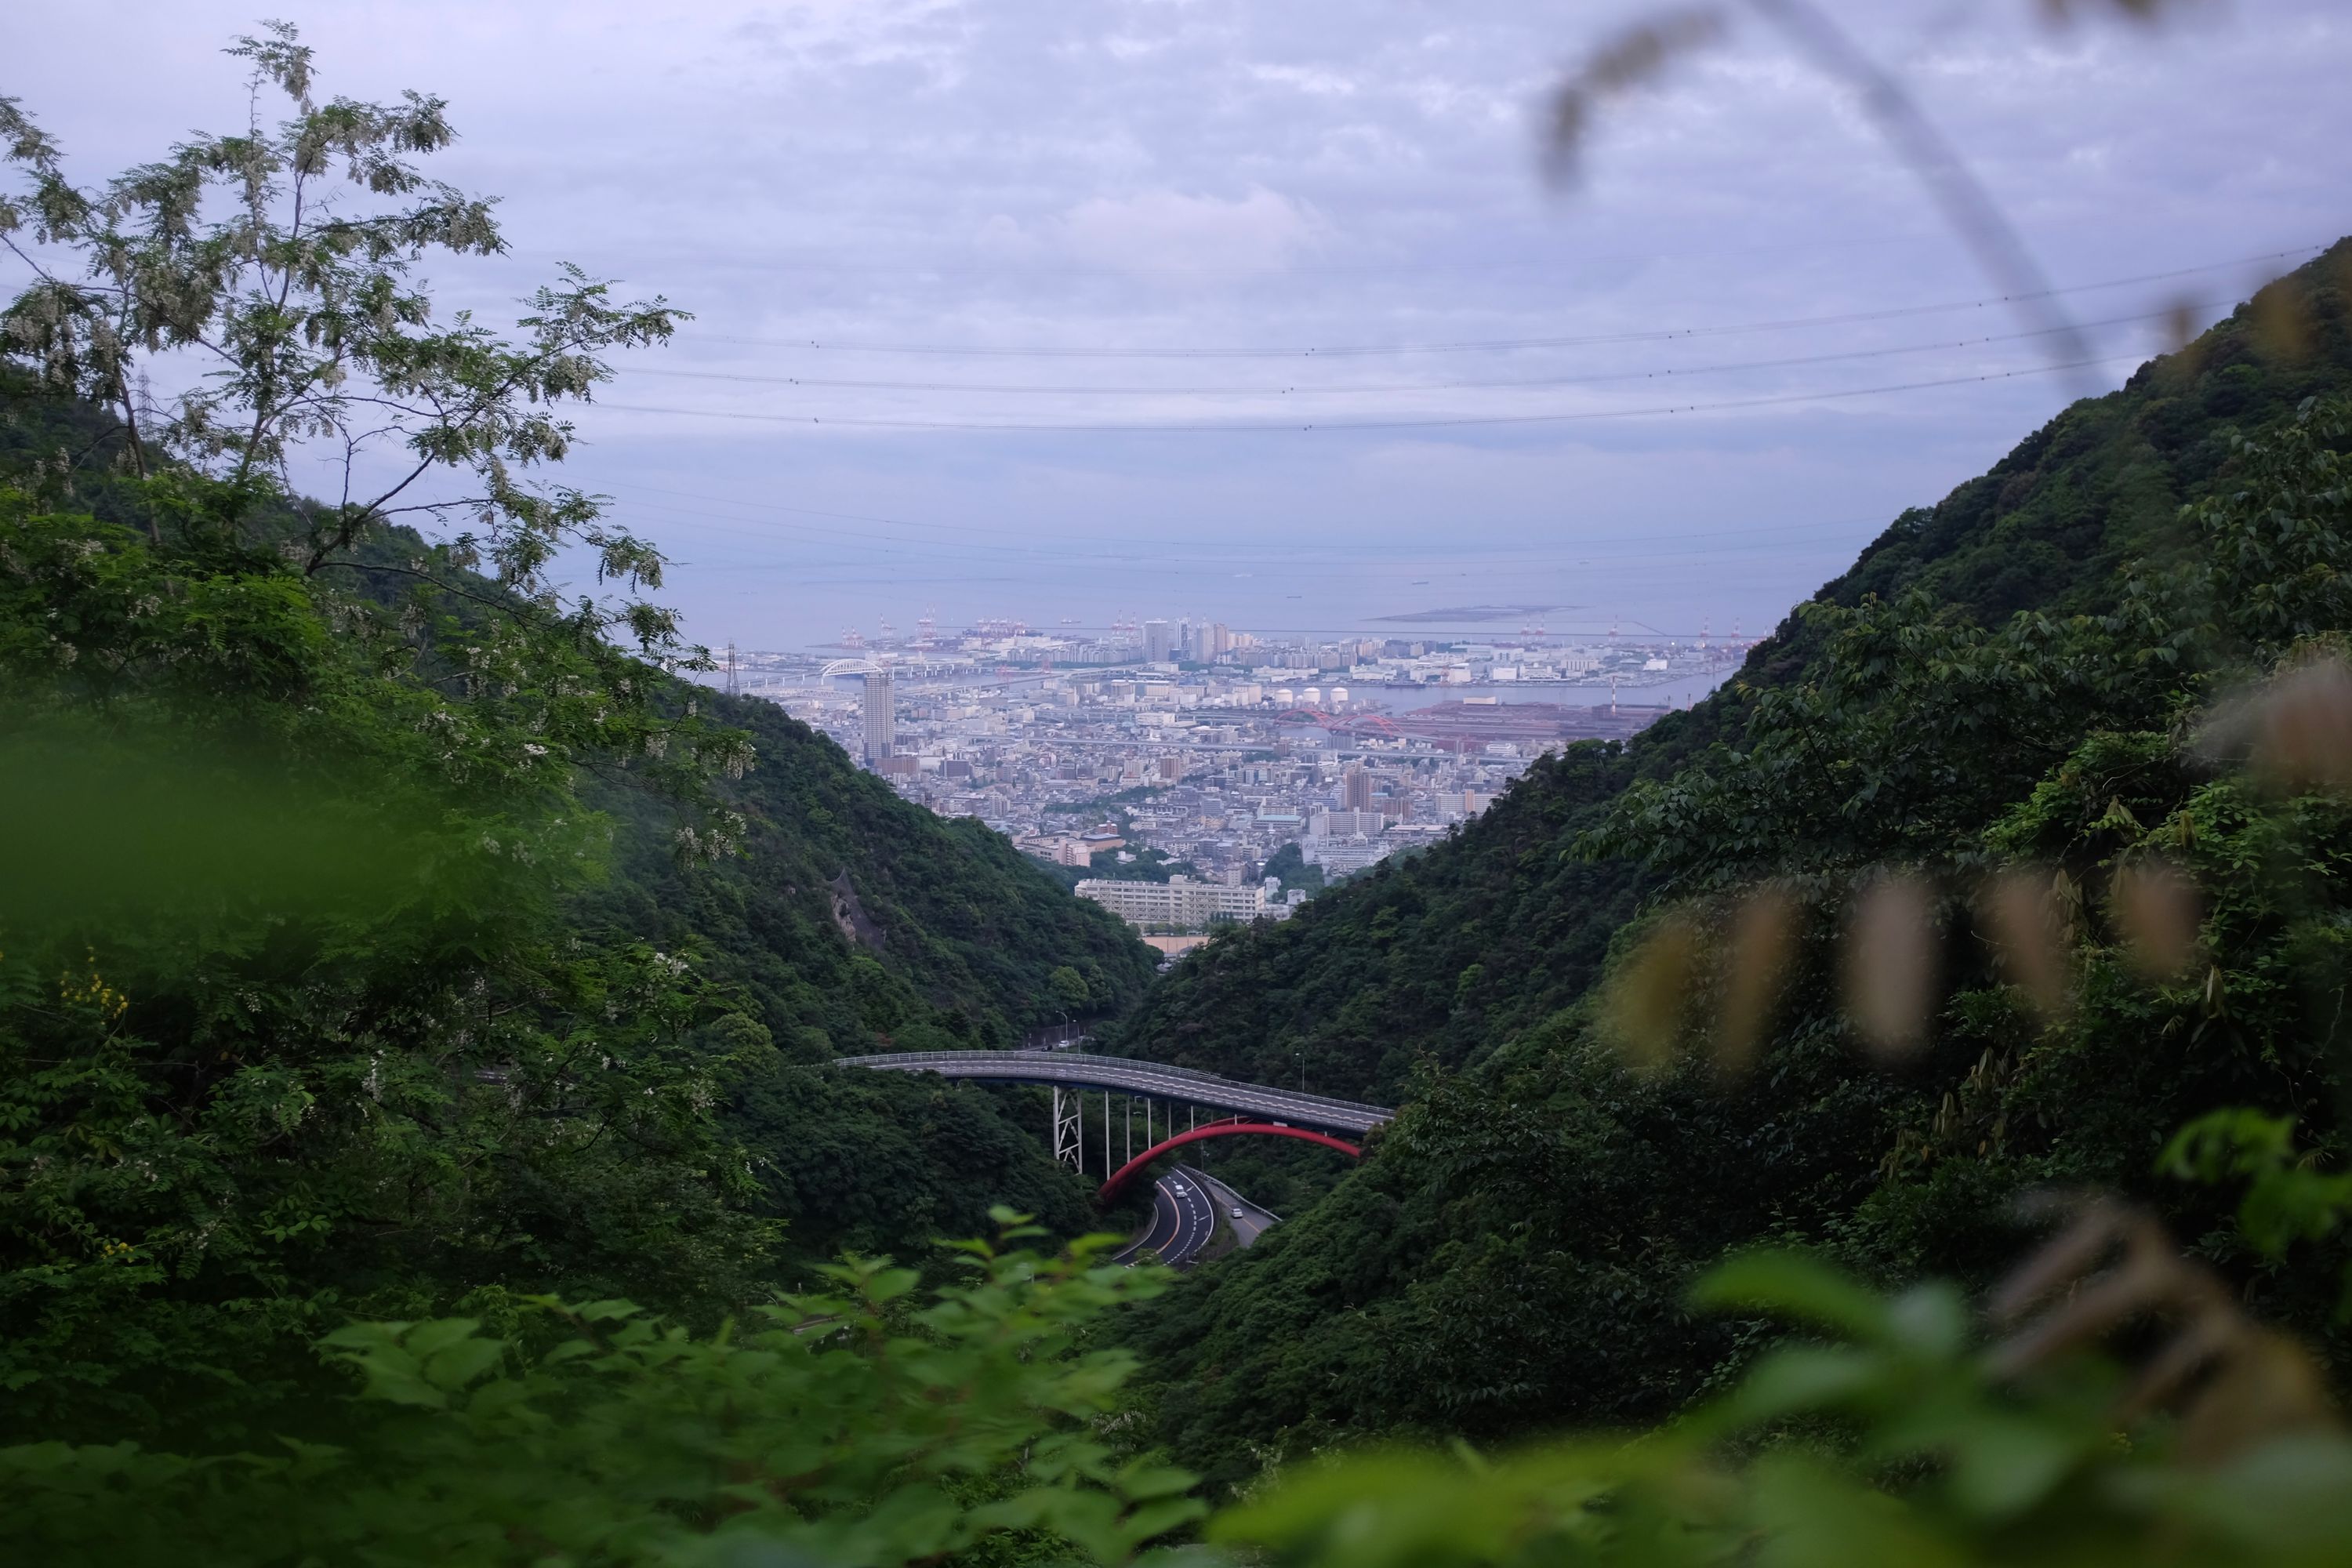 Looking down on a twisting mountain road, then Kōbe, then the sea beyond, under an overcast sky.